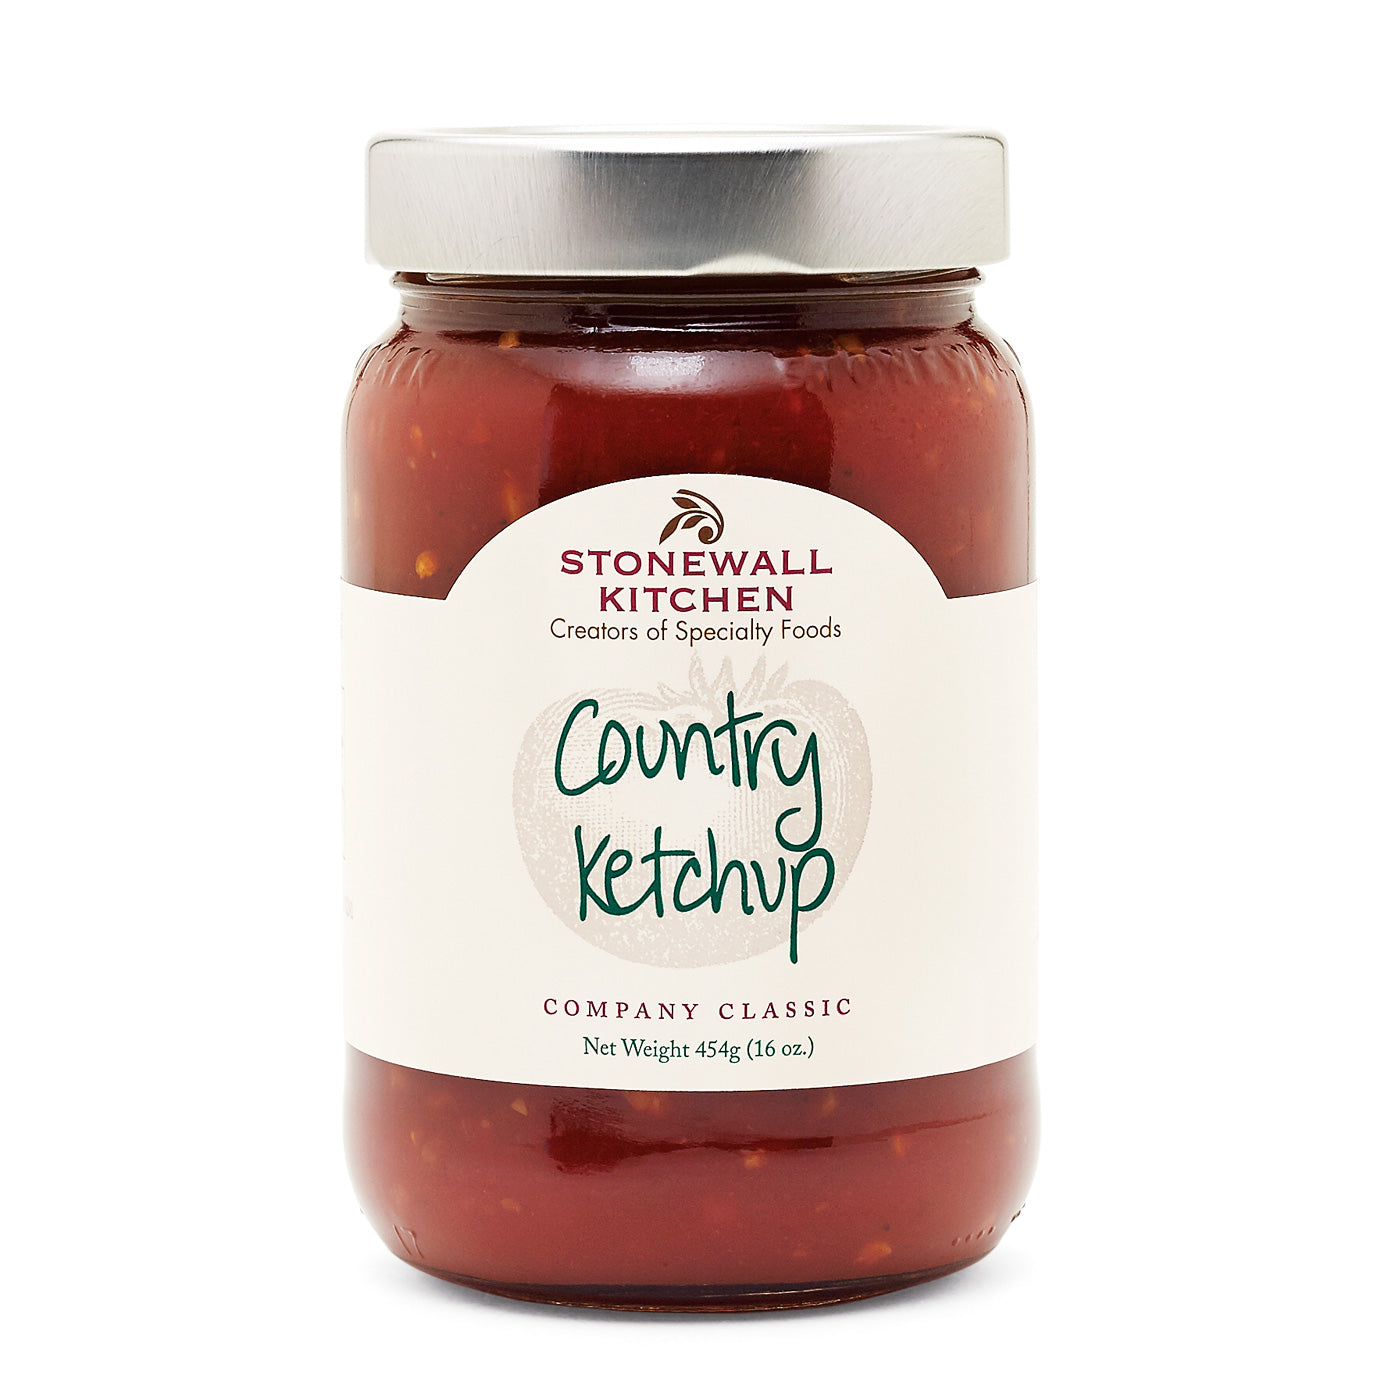 jar of Stonewall Kitchen Country Ketchup 16 oz. 454g made in Maine company classic